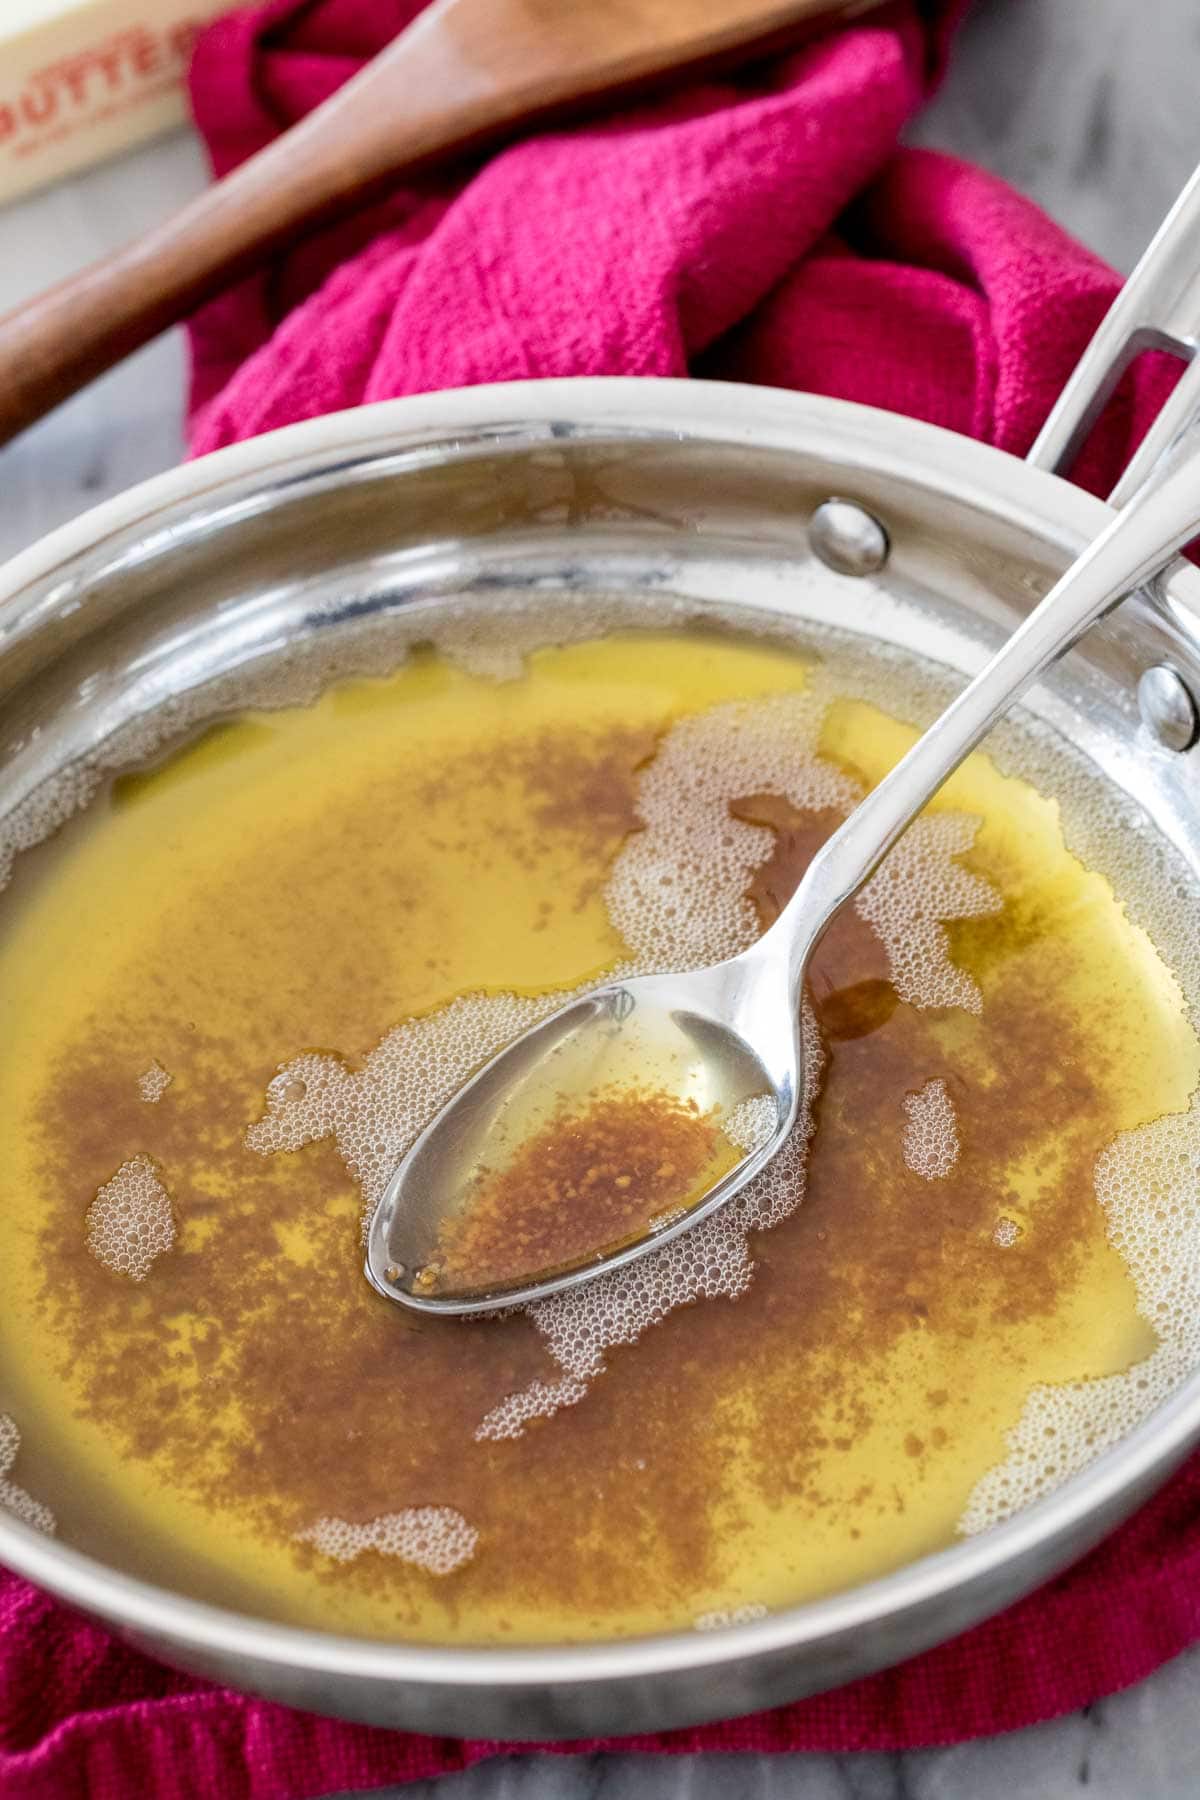 metal spoon scooping out golden brown melted butter from a stainless steel pan